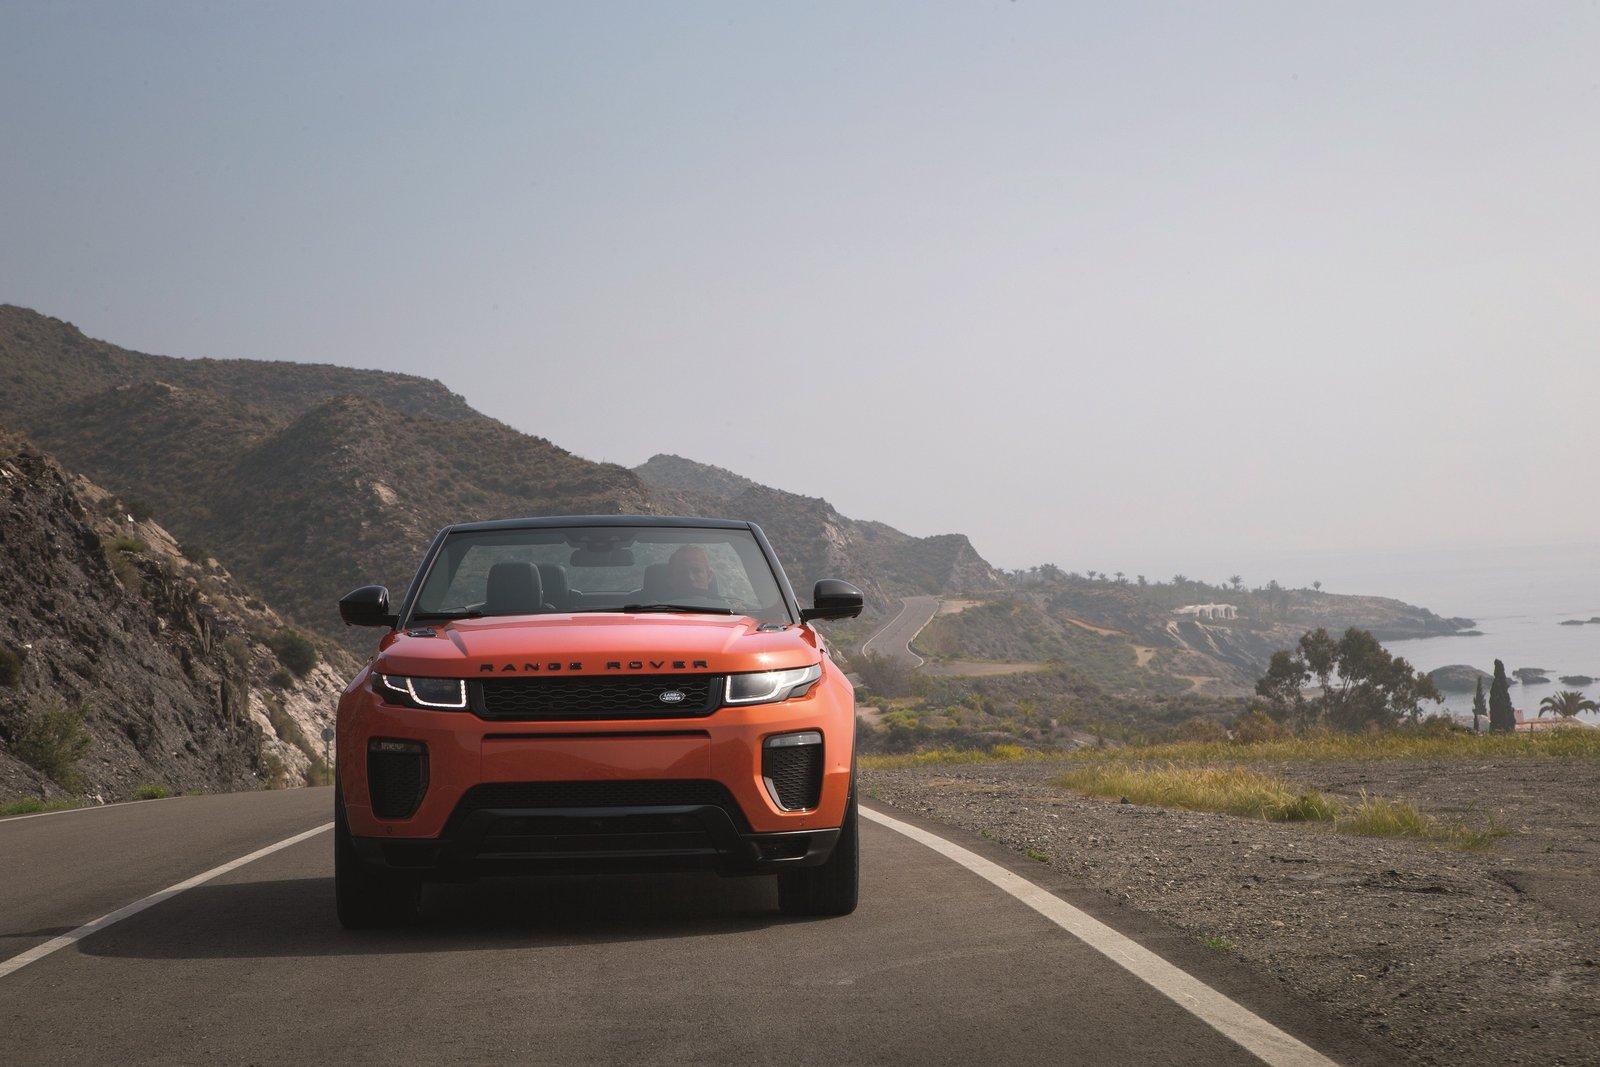 2017 Range Rover Evoque Convertible Revealed with $50,475 ...